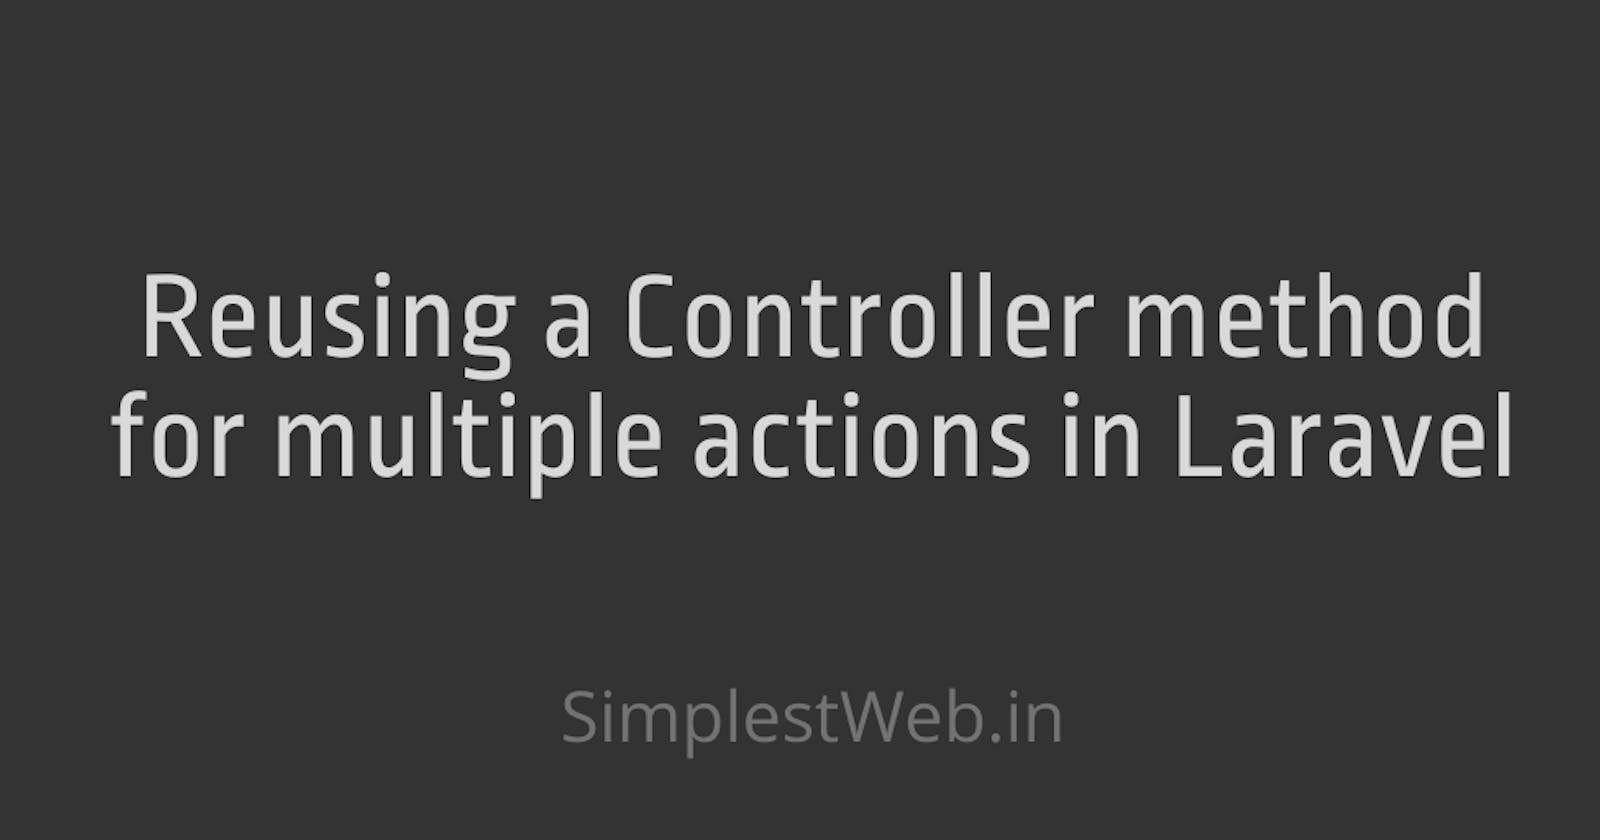 Reusing a Controller method for multiple actions in Laravel